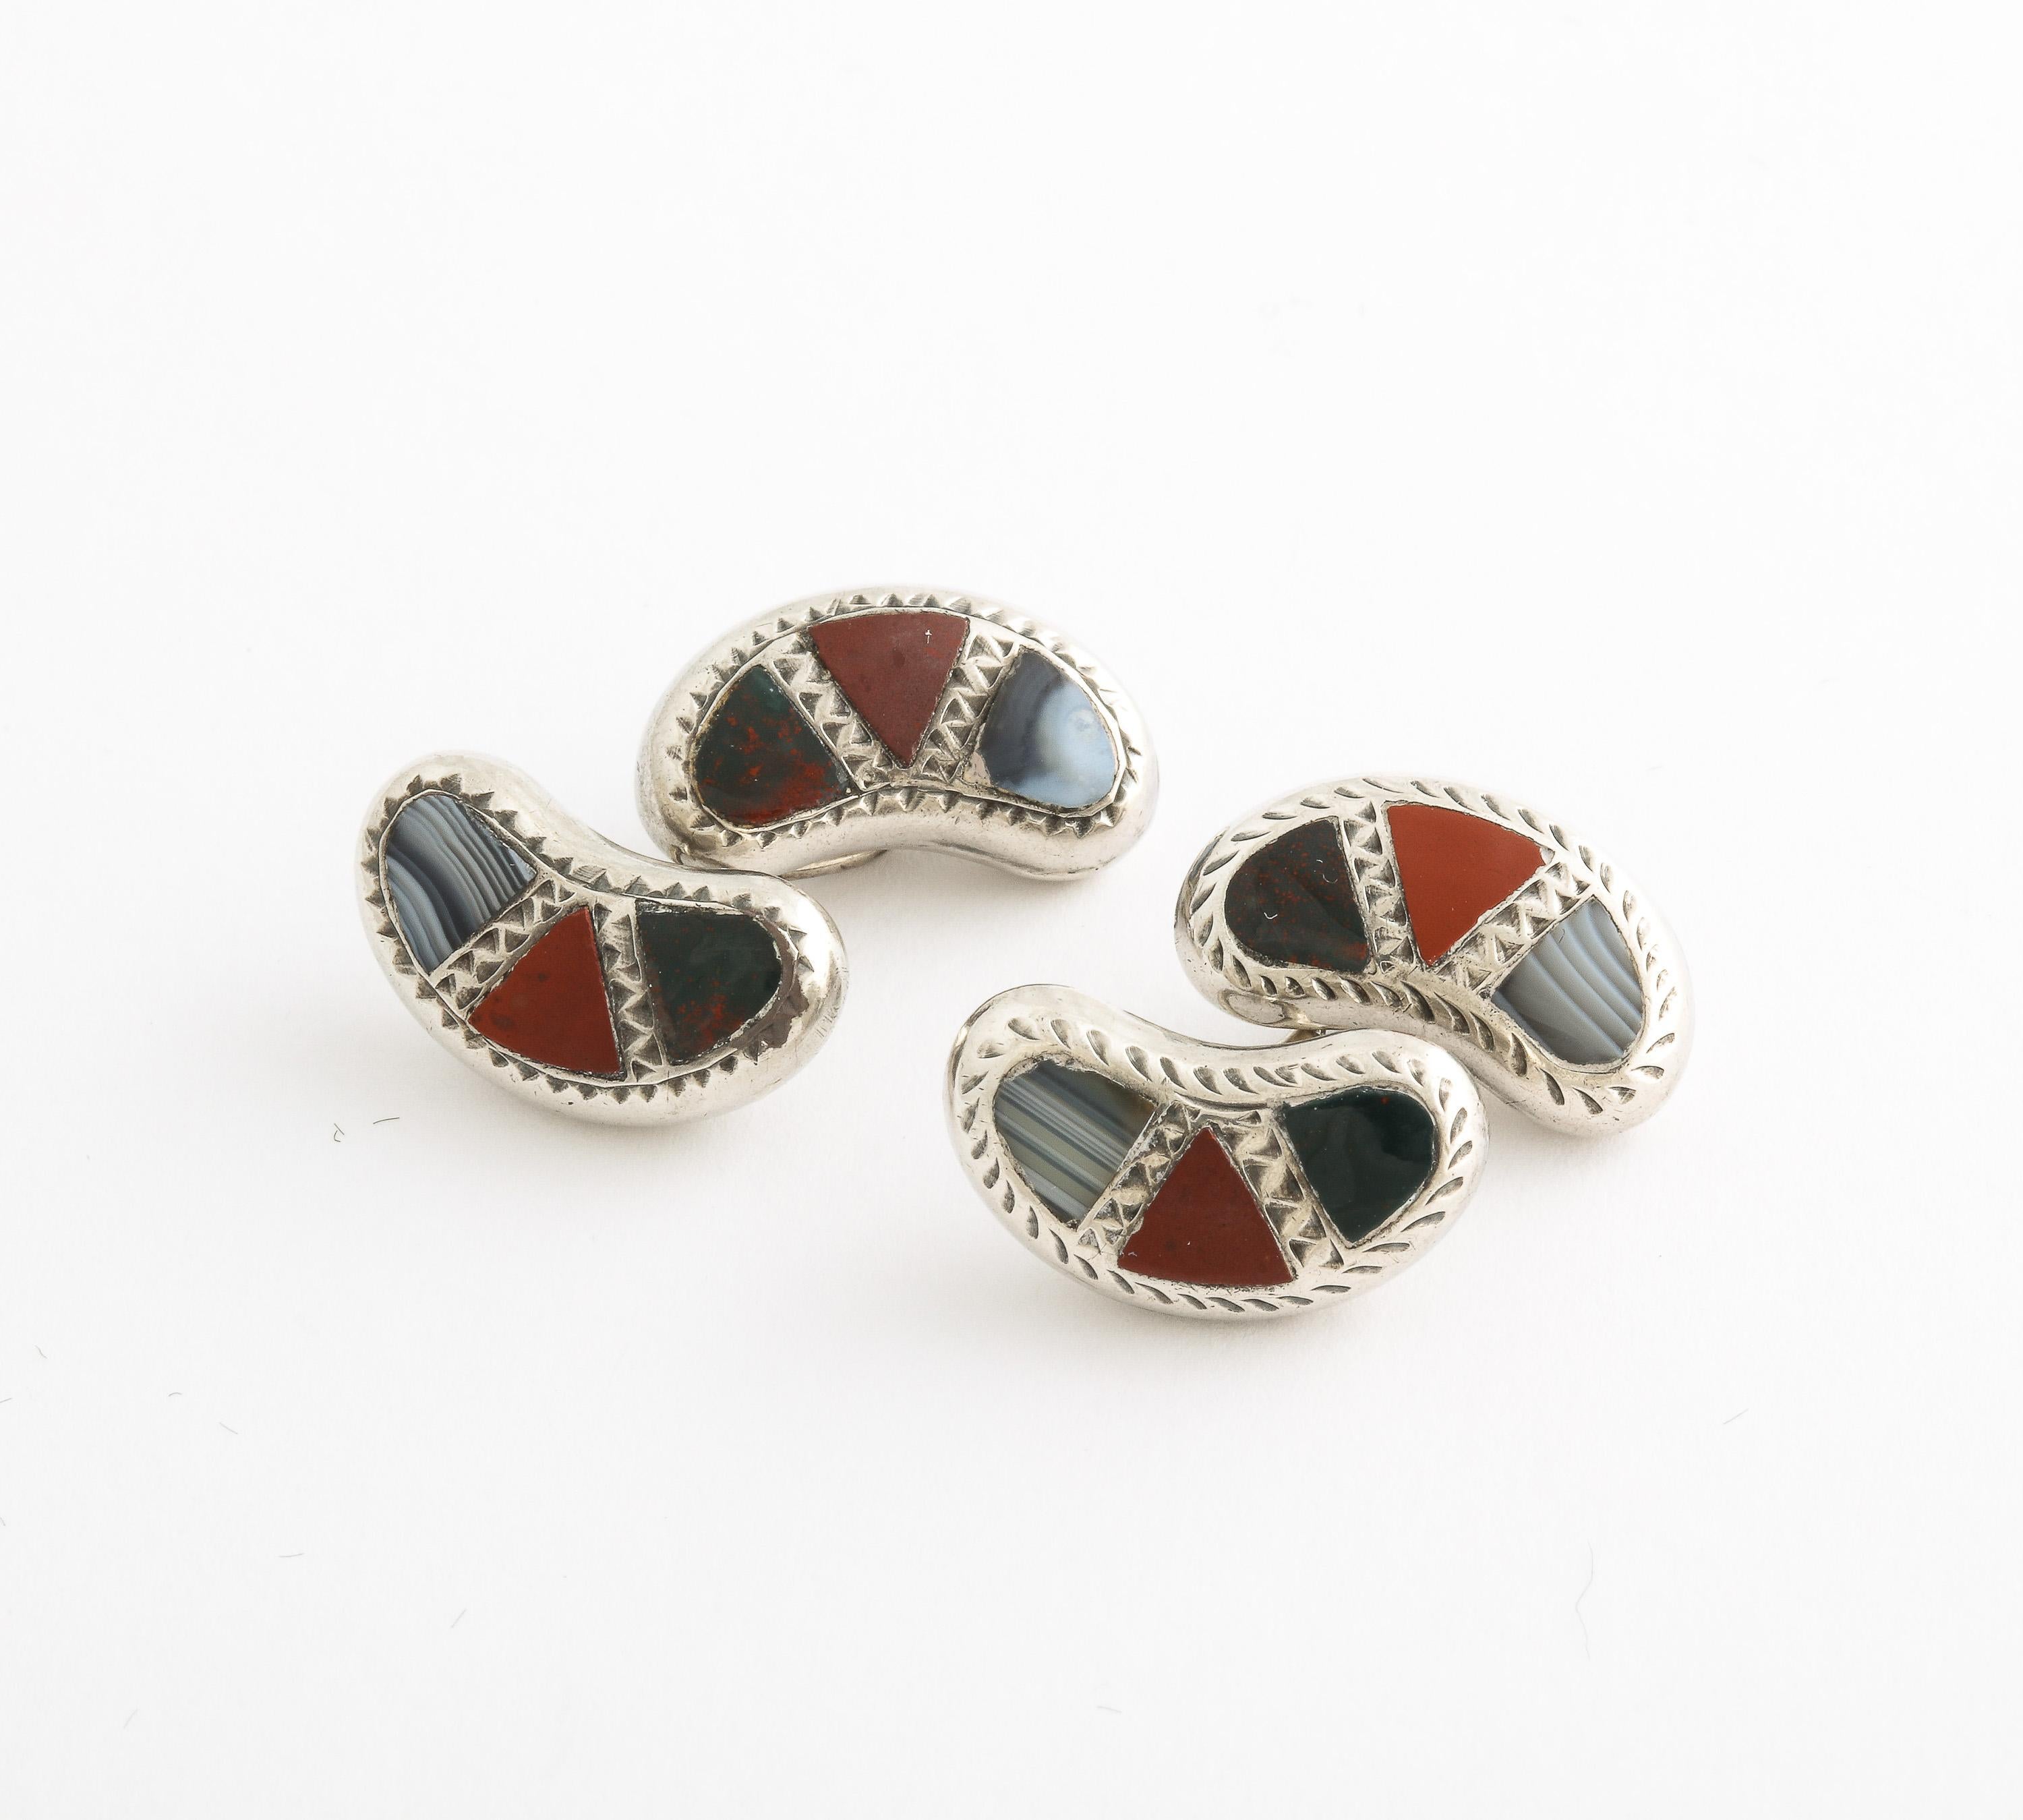 Edwardian Pair of Kidney-Shaped Scottish Agate and Sterling Silver Cuff Links In Good Condition For Sale In New York, NY